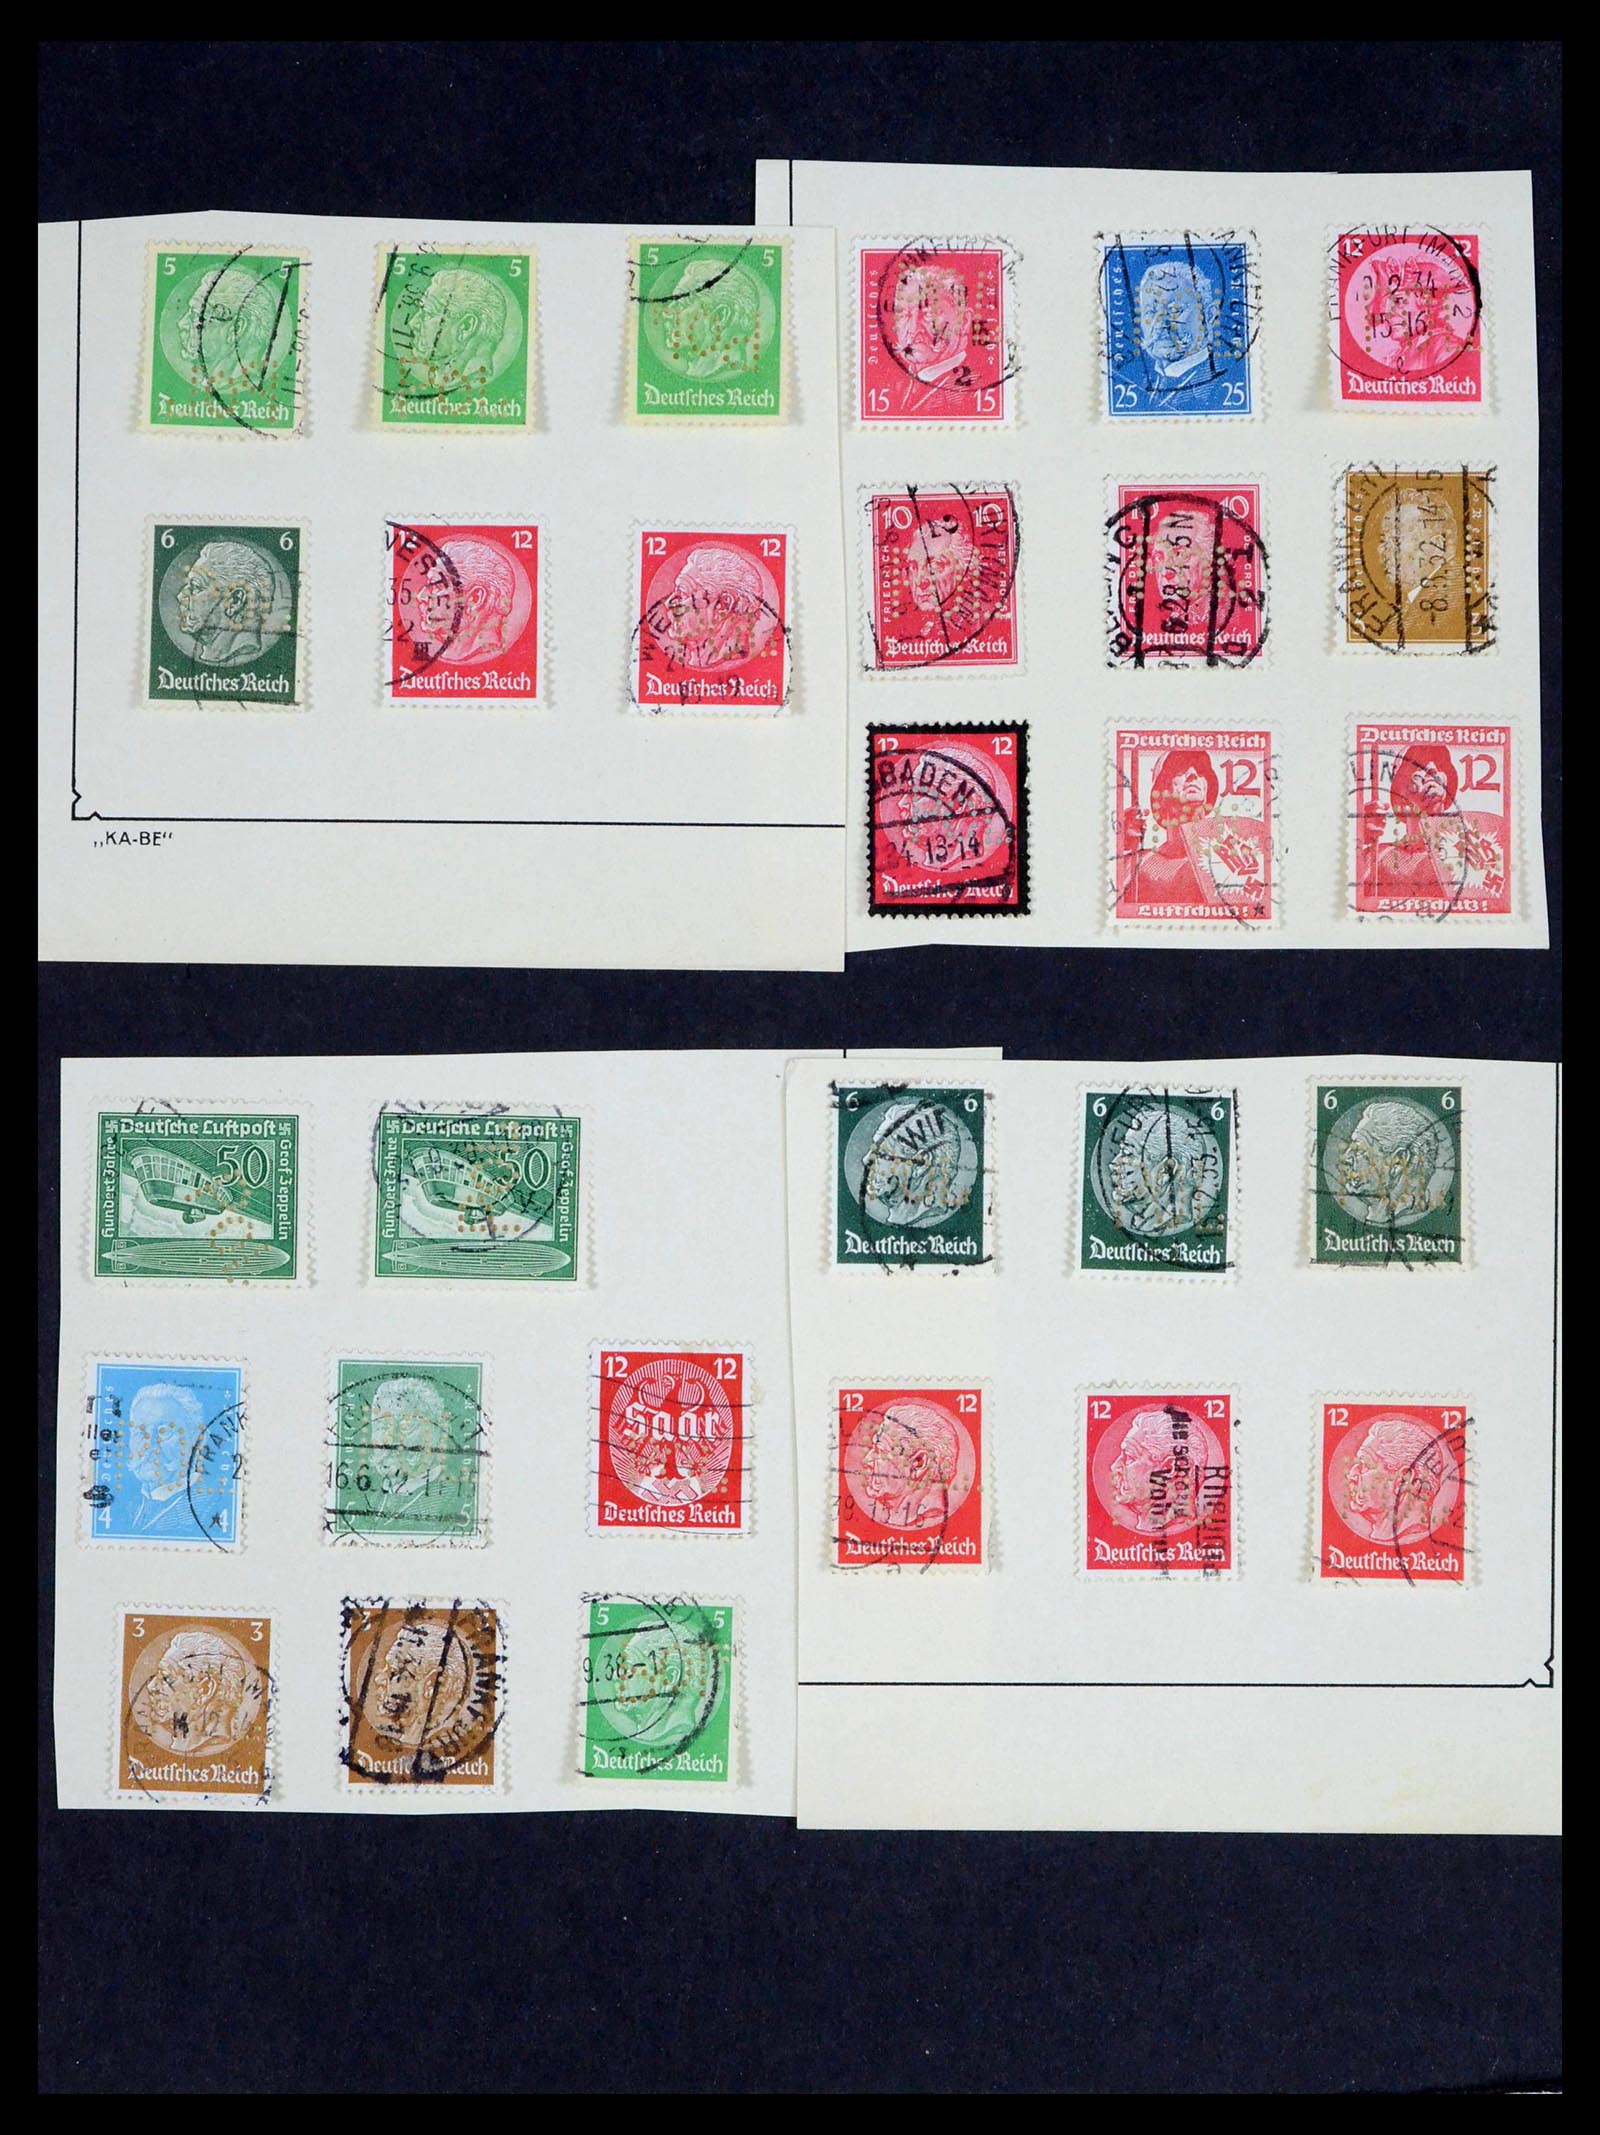 39458 0013 - Stamp collection 39458 Germany POL lochungen 1926-1955.